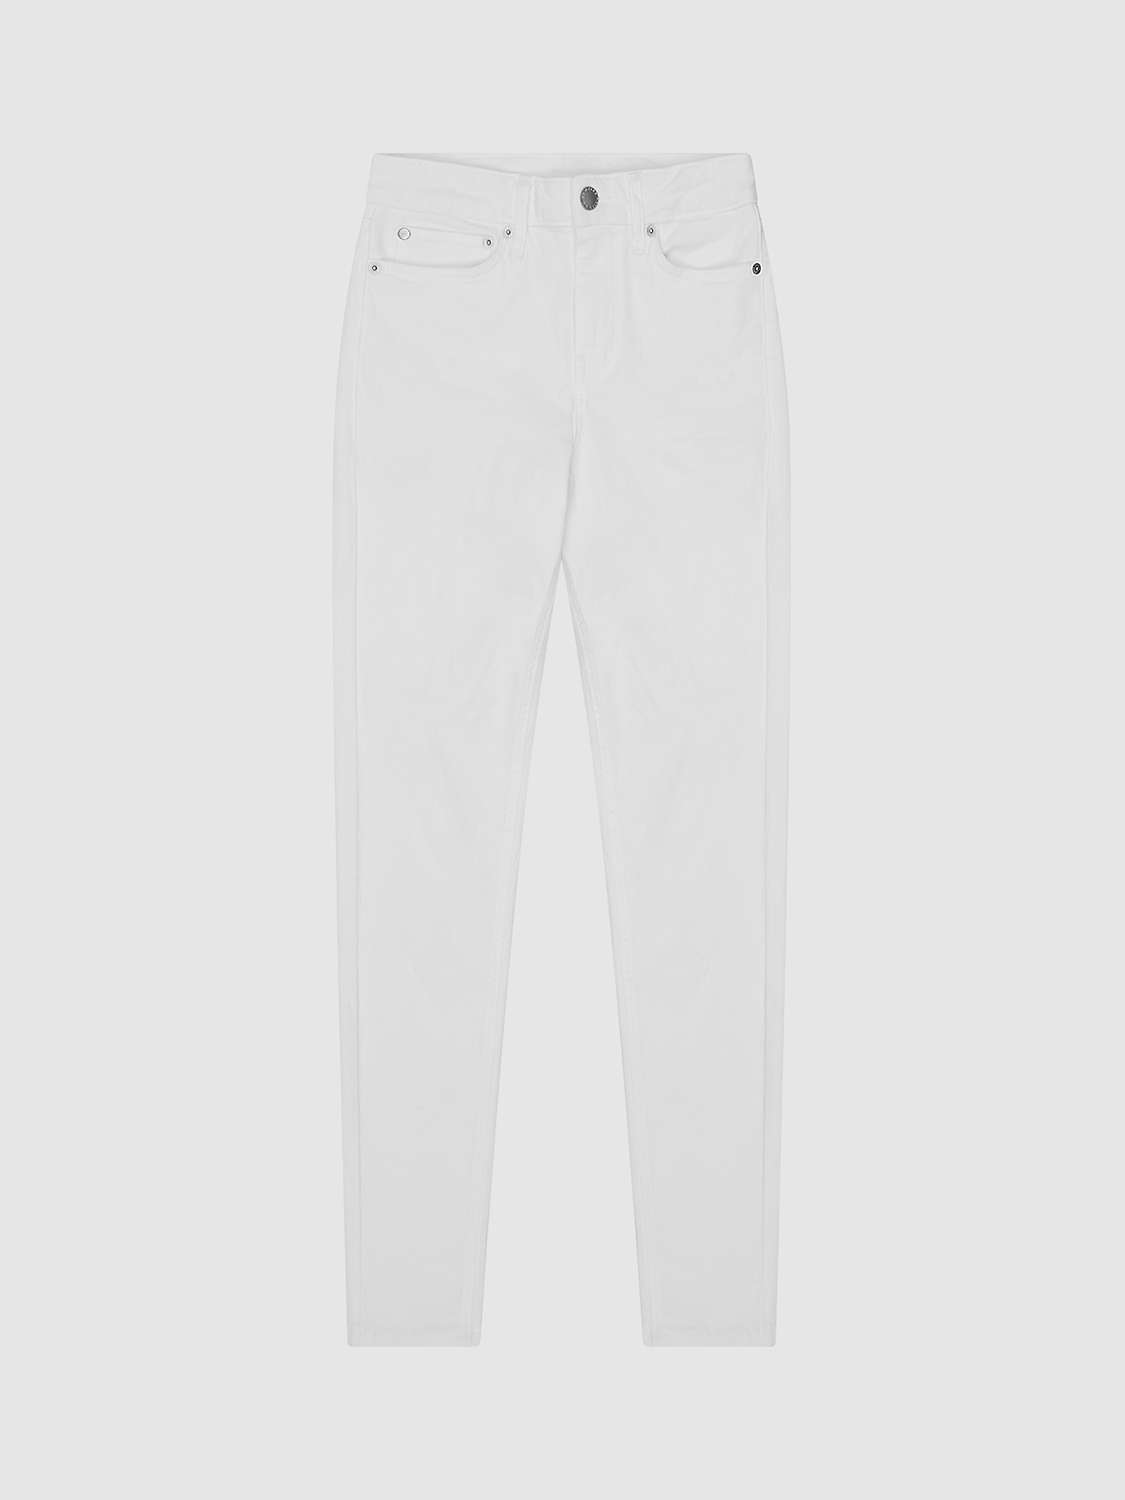 Reiss Lux Skinny Jeans, White at John Lewis & Partners